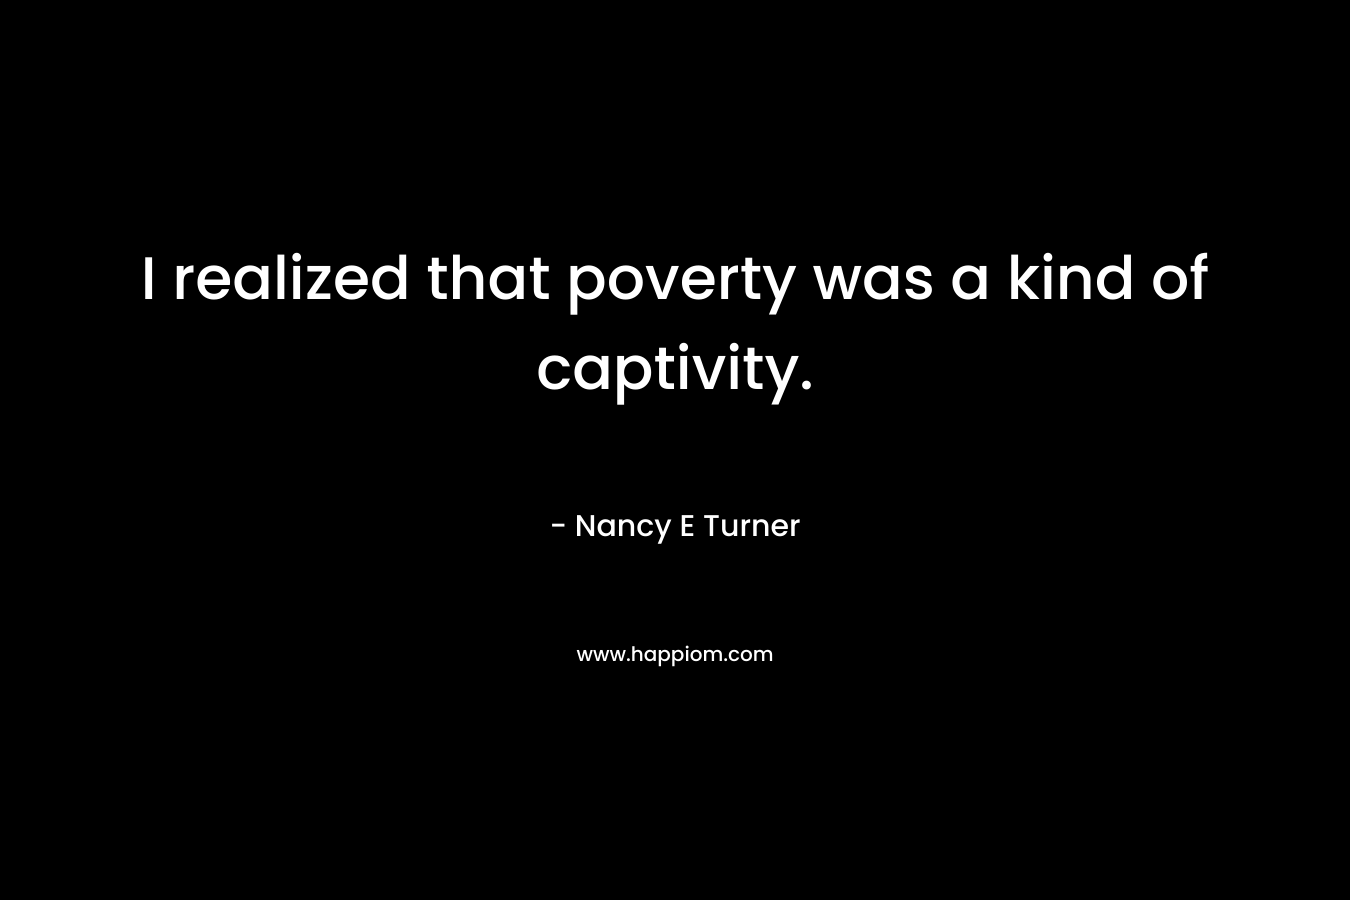 I realized that poverty was a kind of captivity.